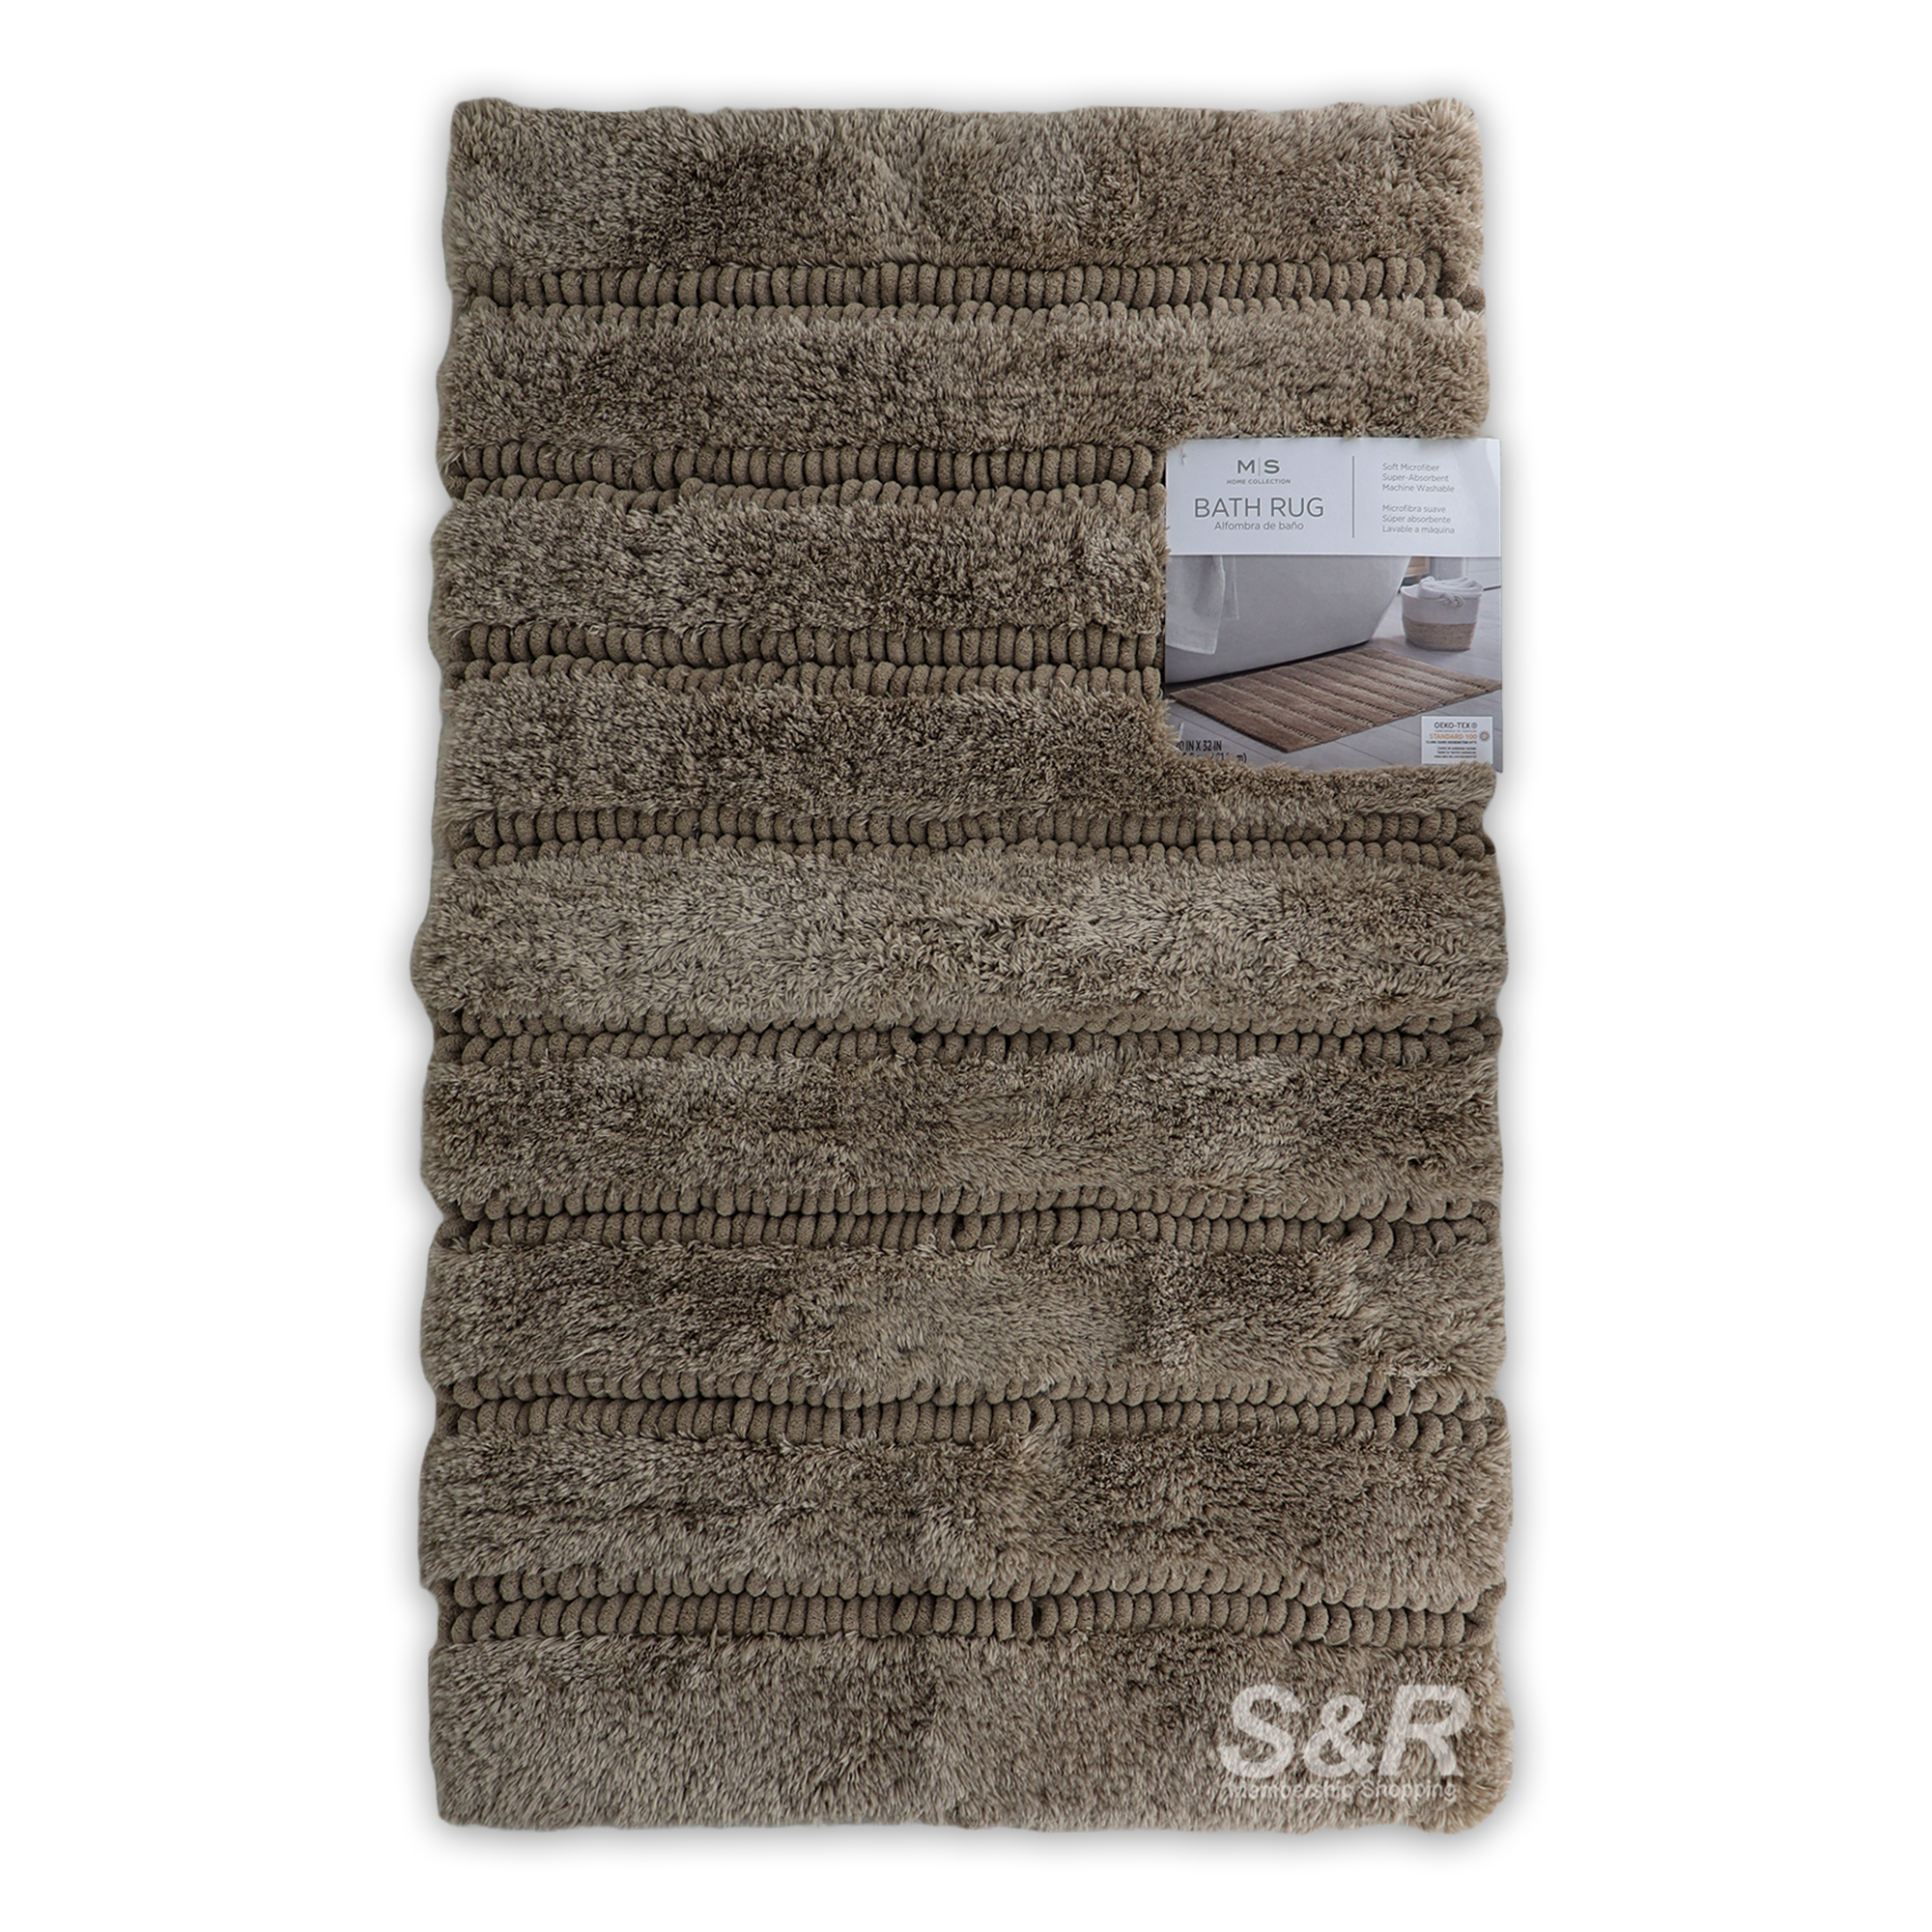 Member's Selection Home Microplush Bath Rug 20in x 32in